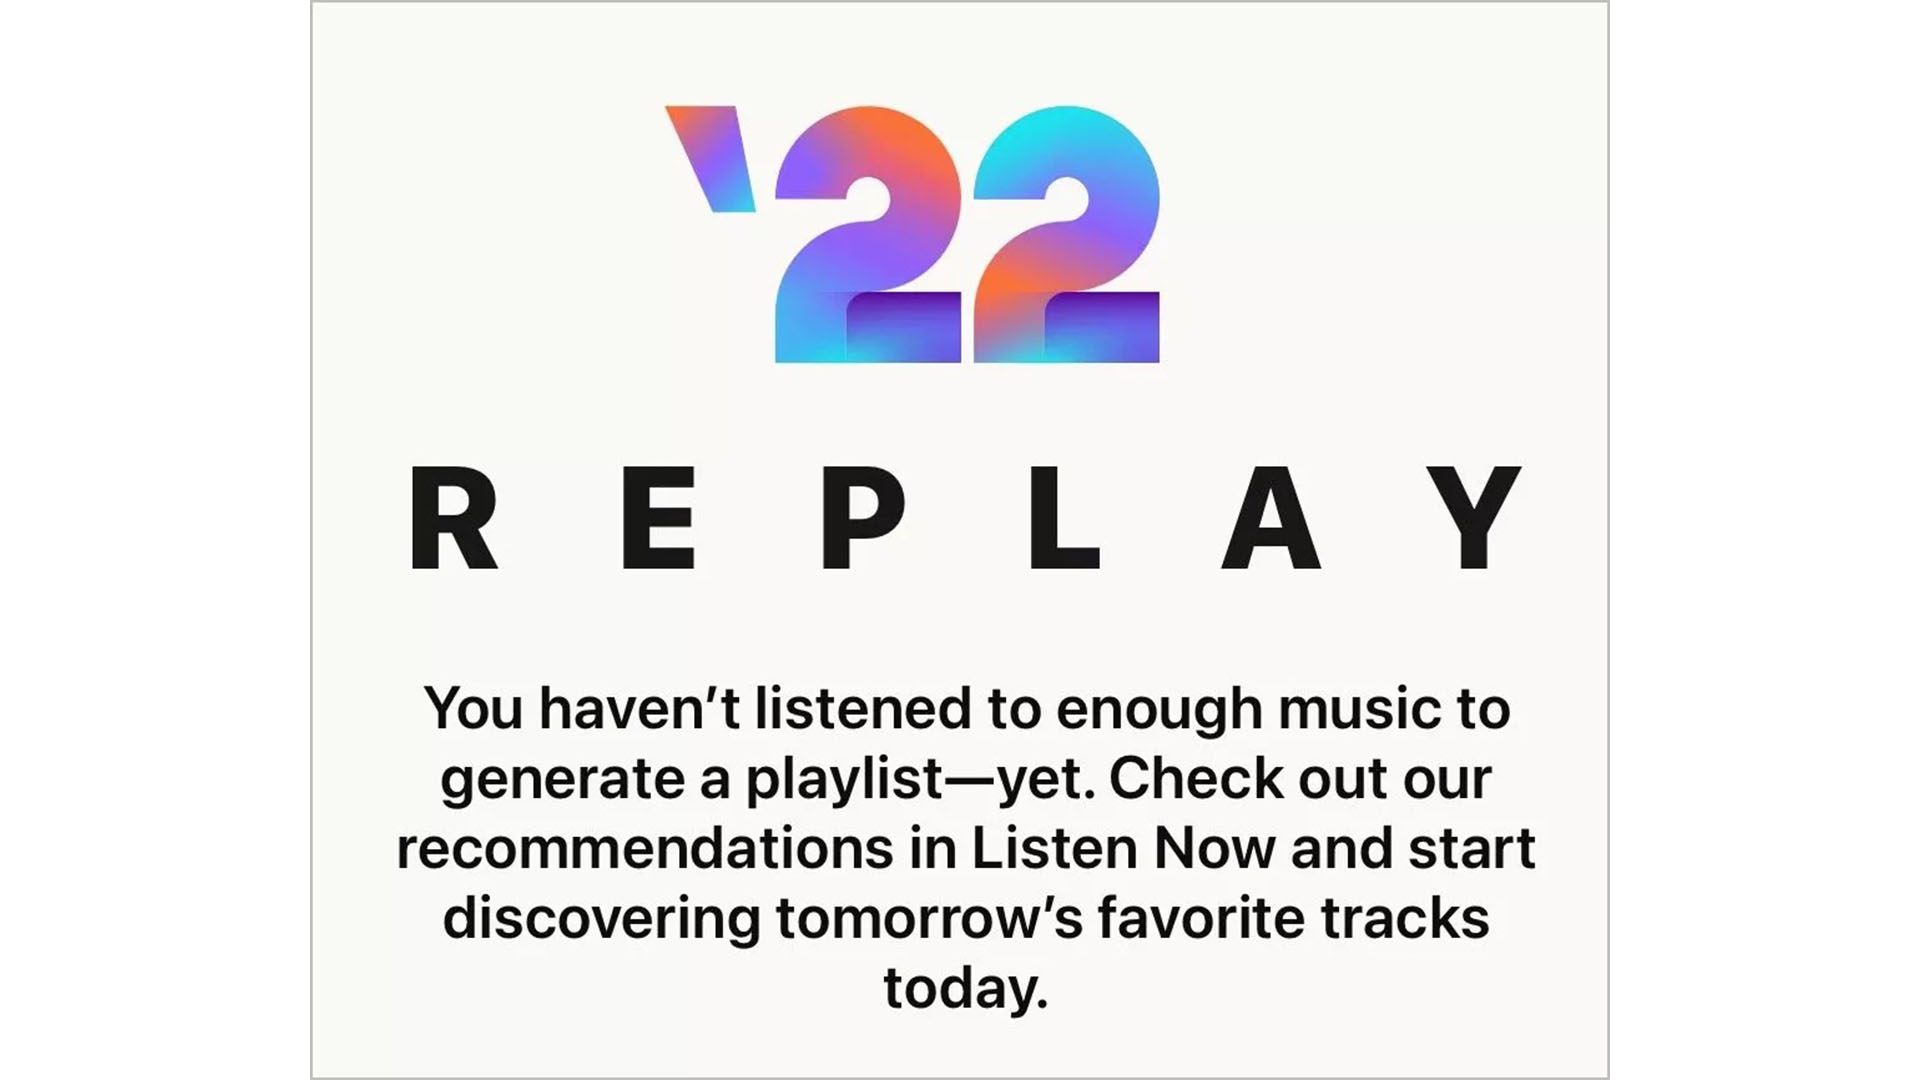 The Apple Replay message stating 'you haven't listened to enough music to generate a playlist - yet. Check out our recommendations in Listen Now and start discovering tomorrow's favorite tracks today'